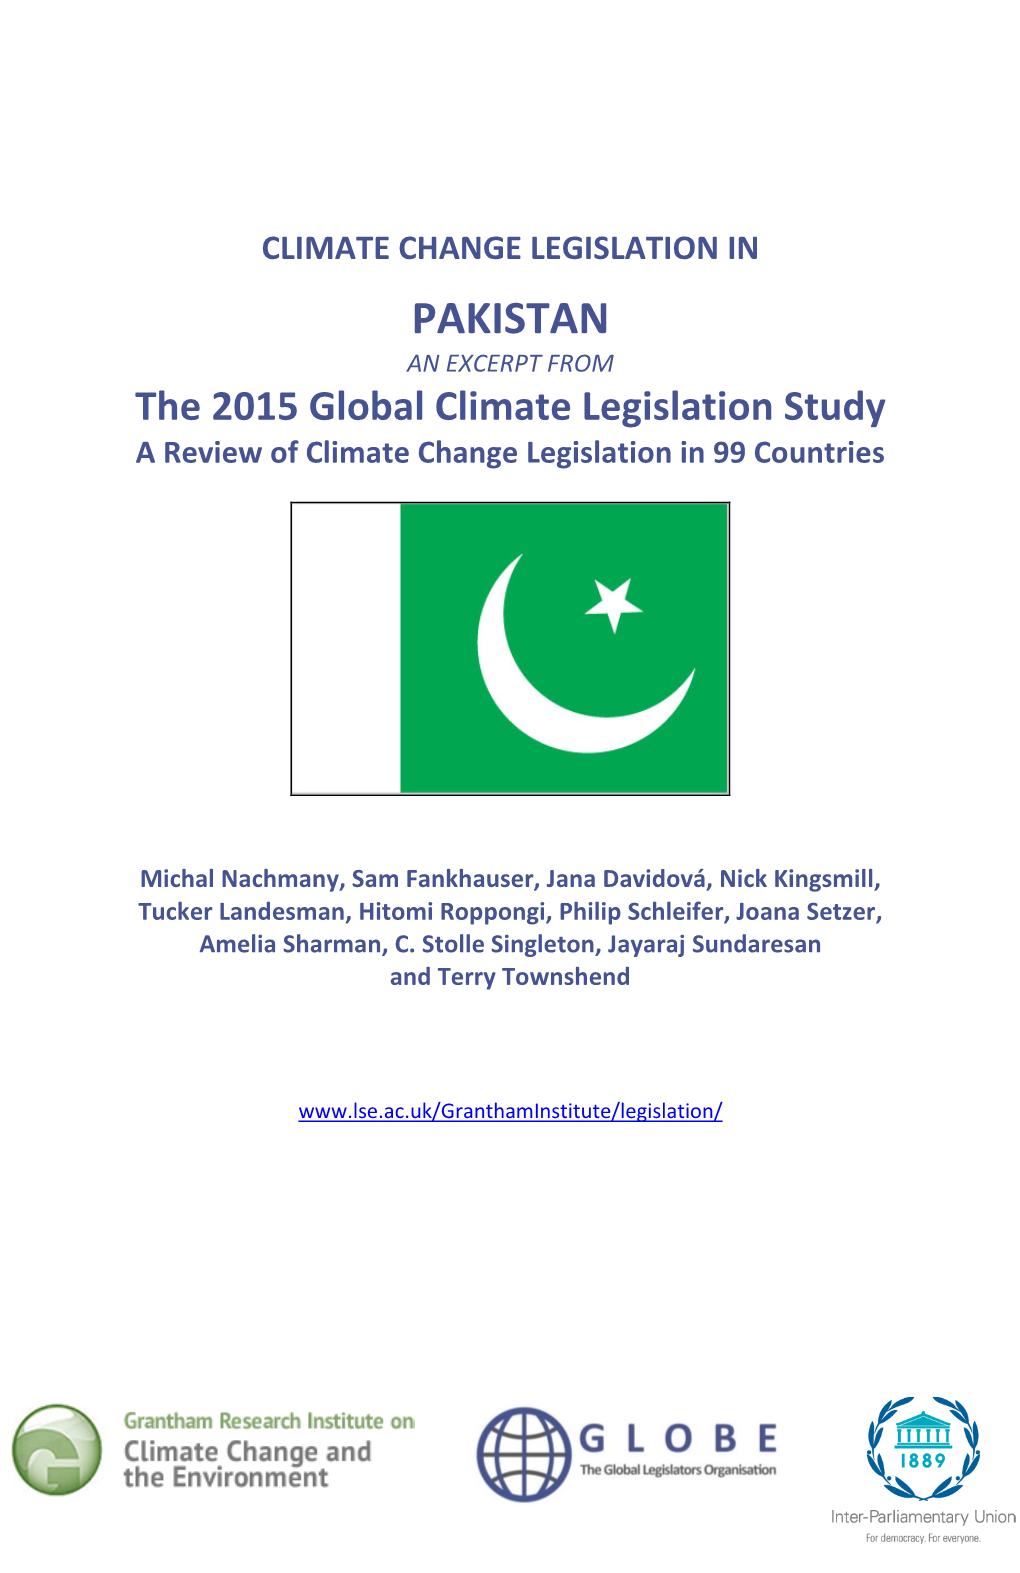 PAKISTAN an EXCERPT from the 2015 Global Climate Legislation Study a Review of Climate Change Legislation in 99 Countries